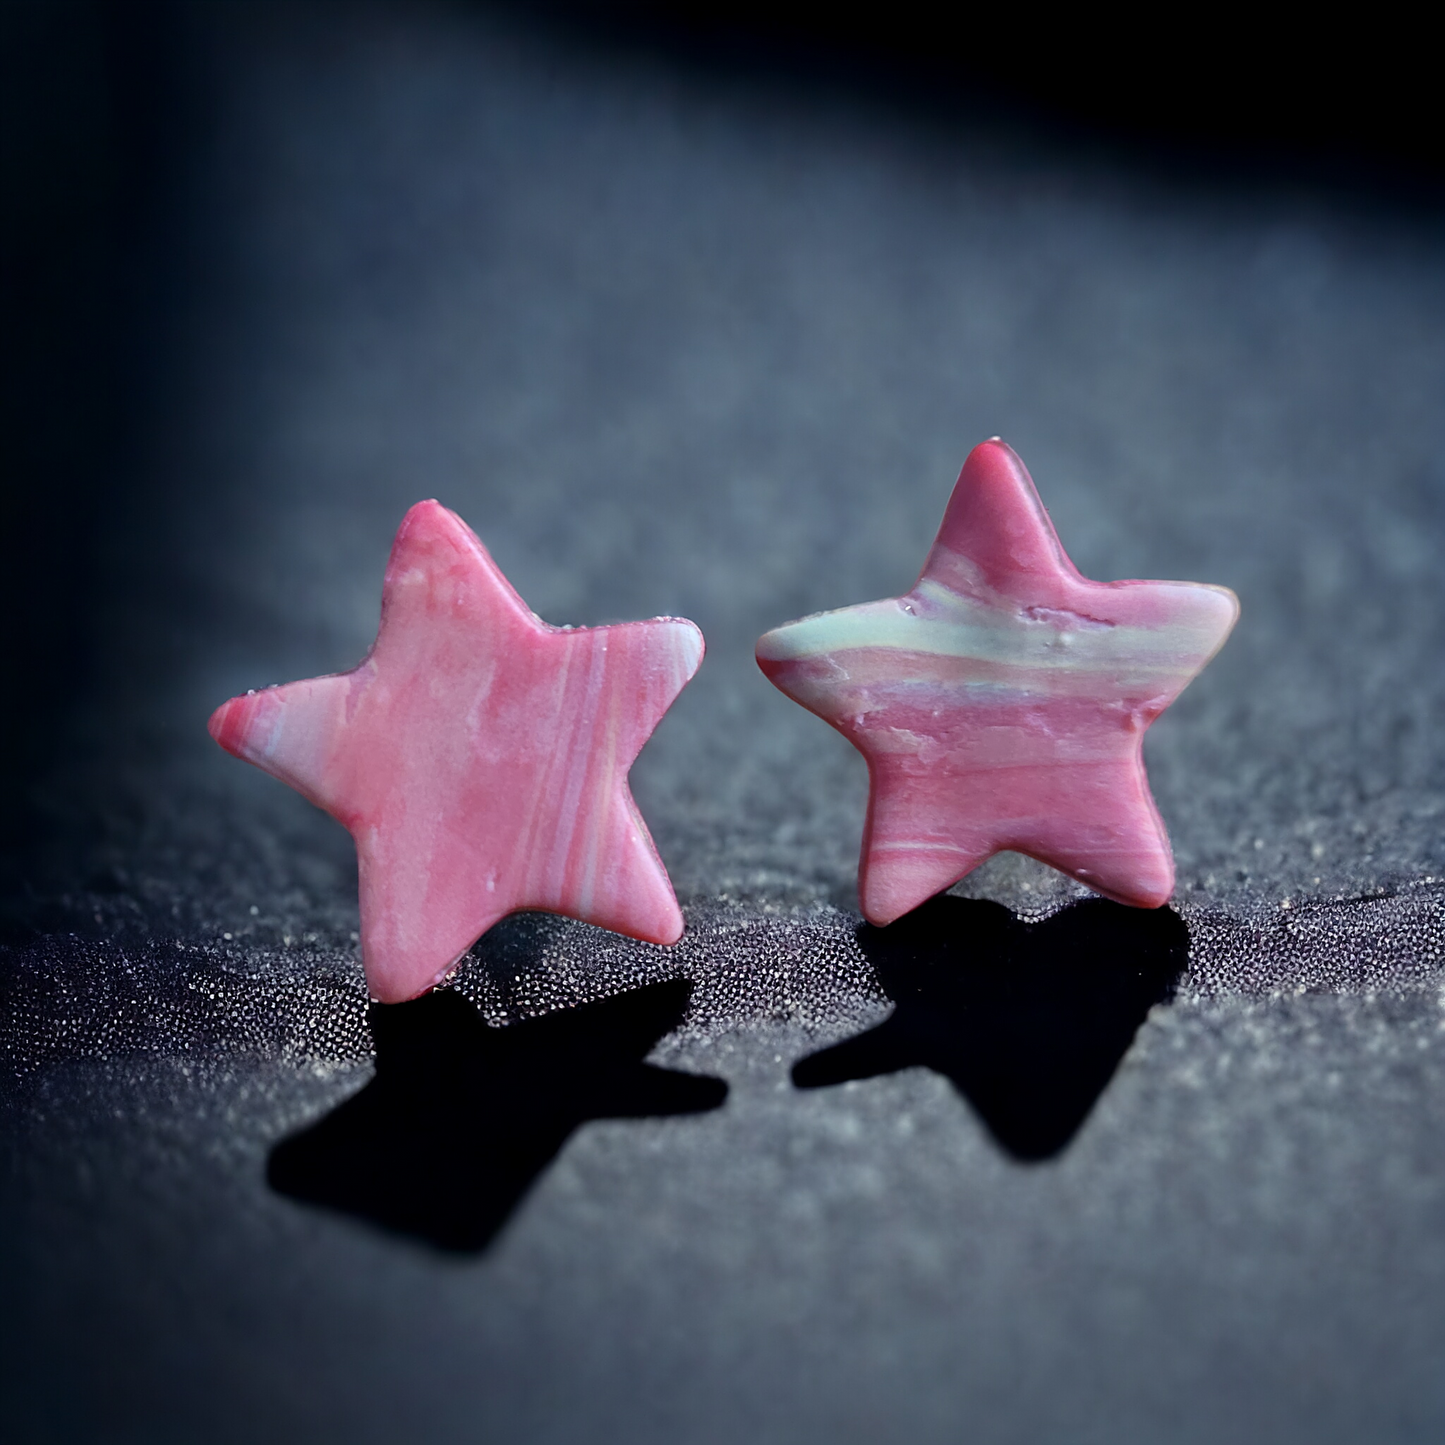 Star Earrings - Women's - Pink and White